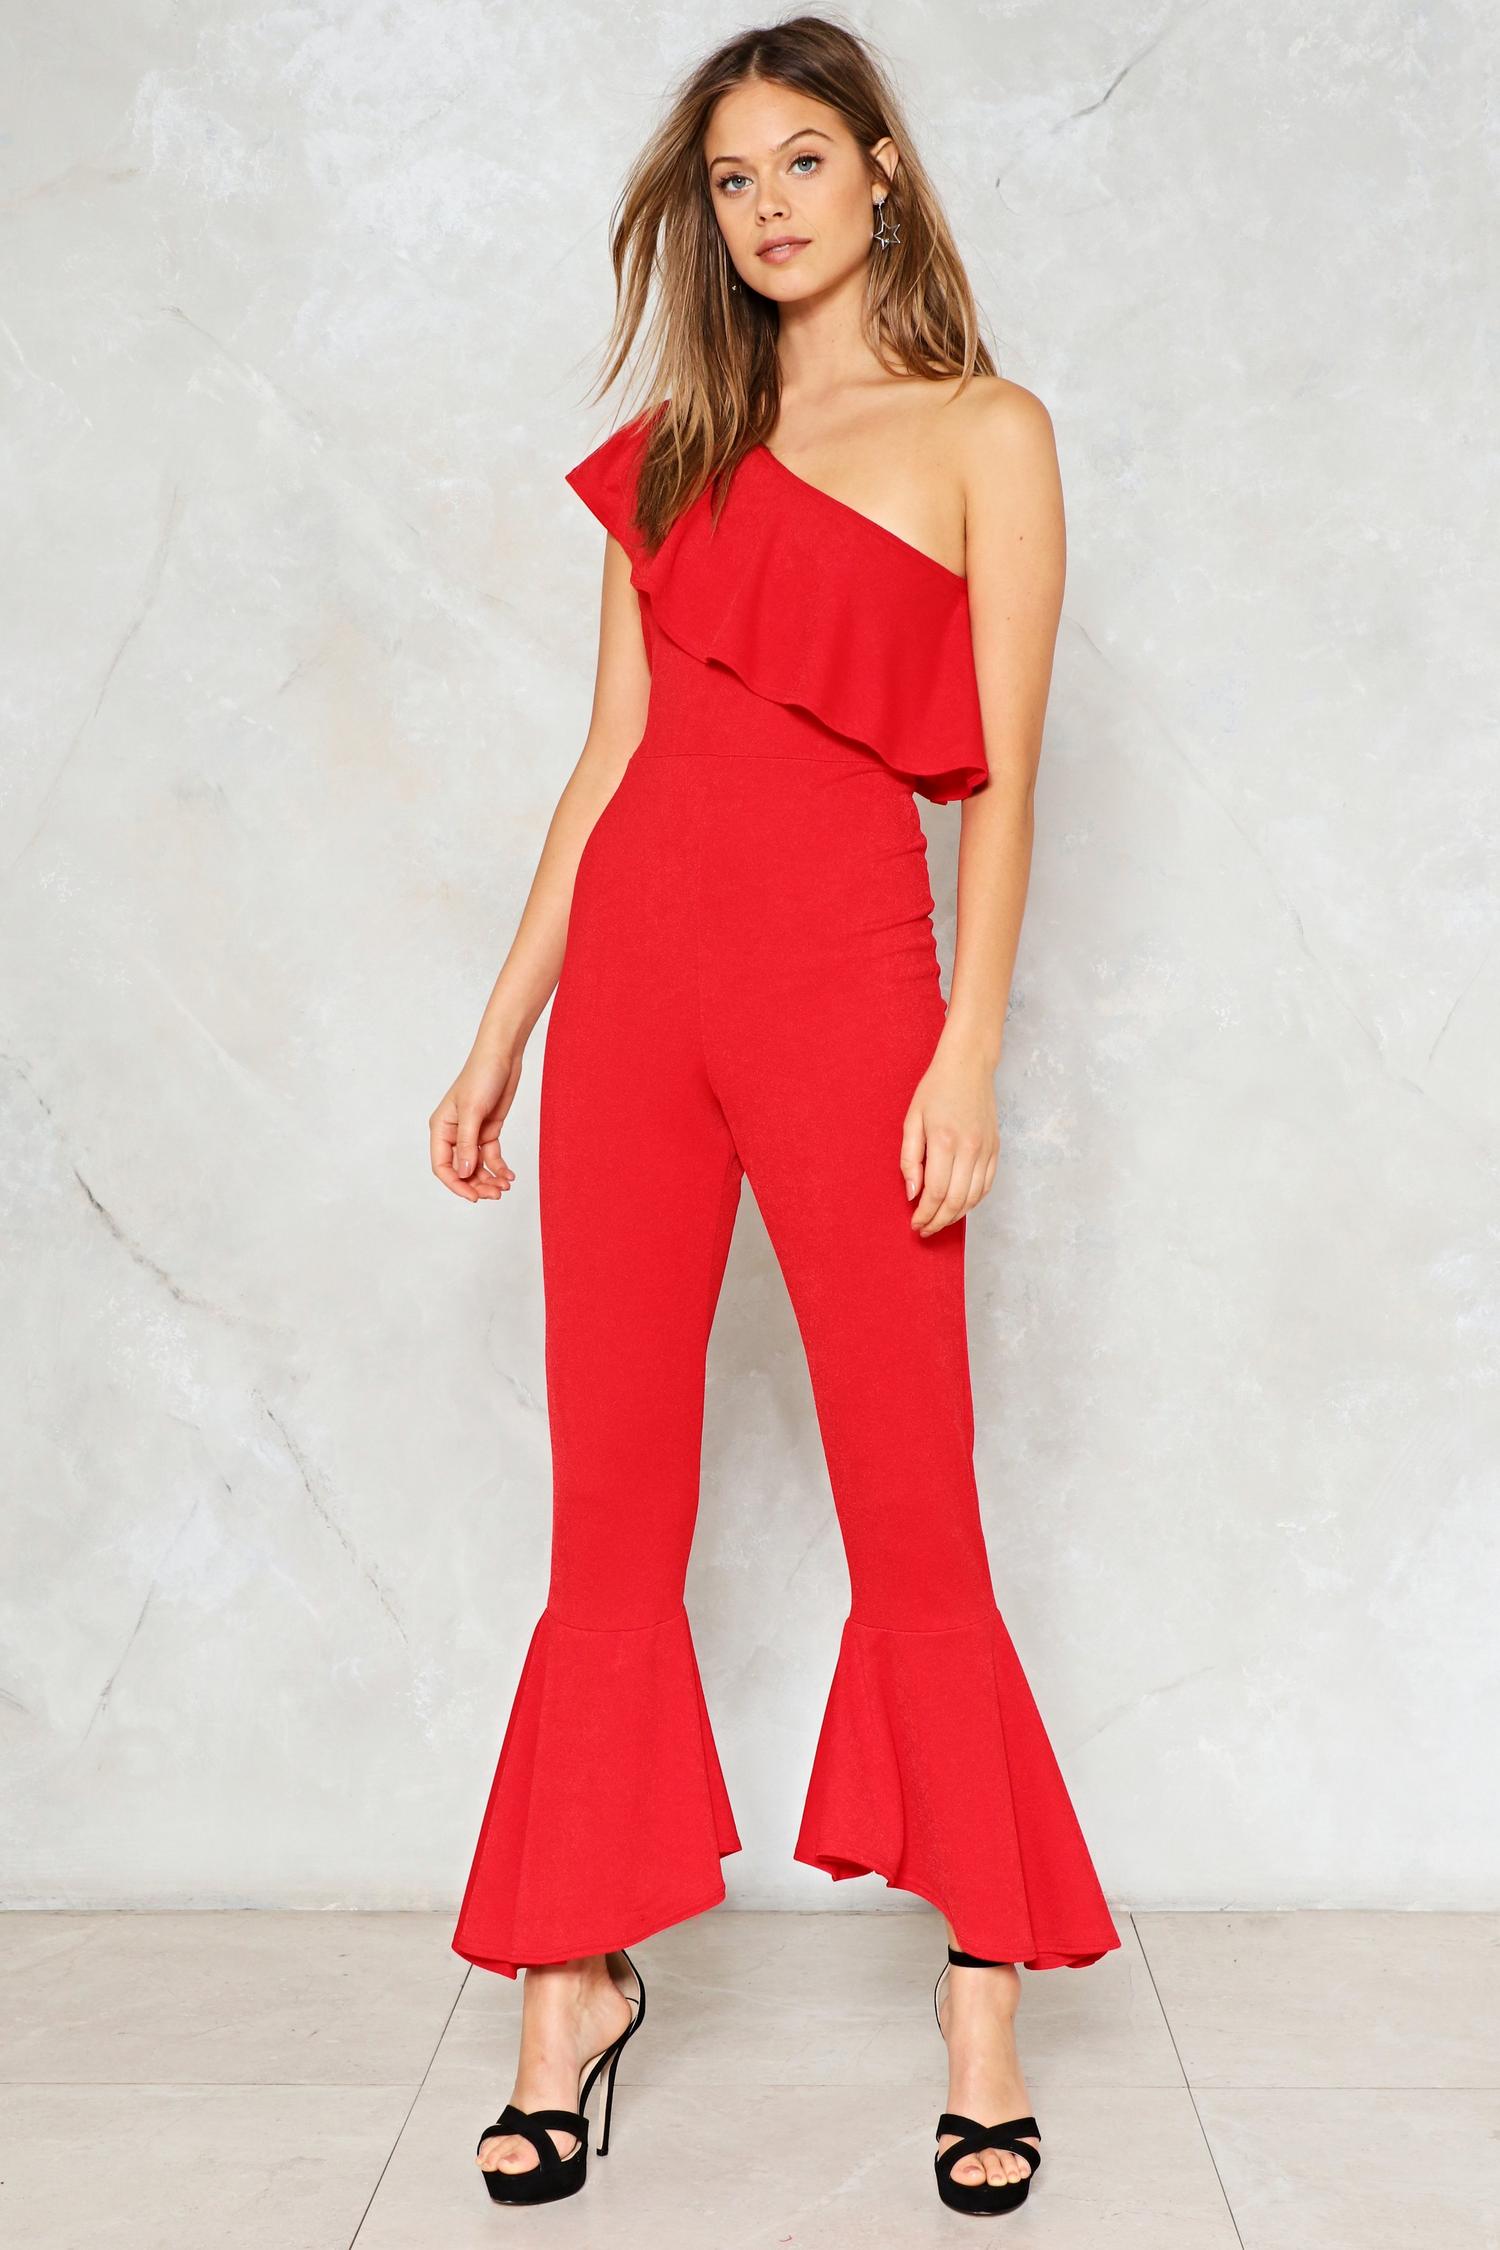 What Do You Flare Ruffle Jumpsuit